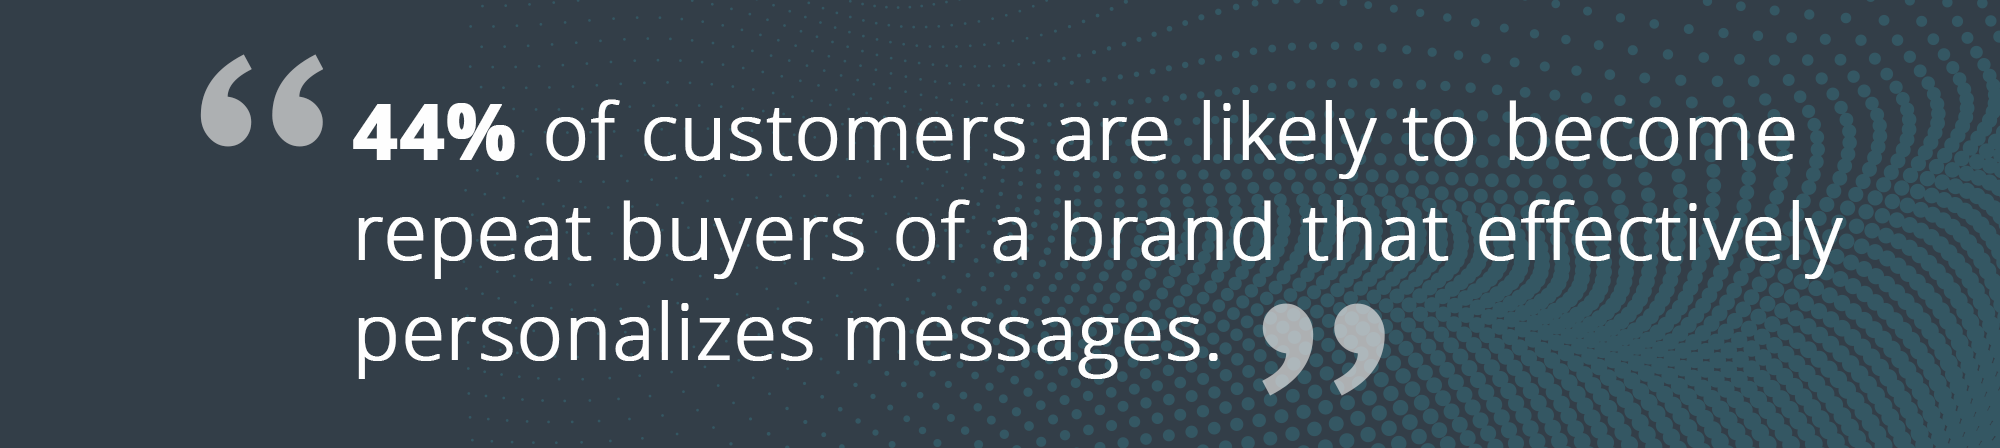 44% of customers are likely to become repeat buyers of a brand that effectively personalizes messages